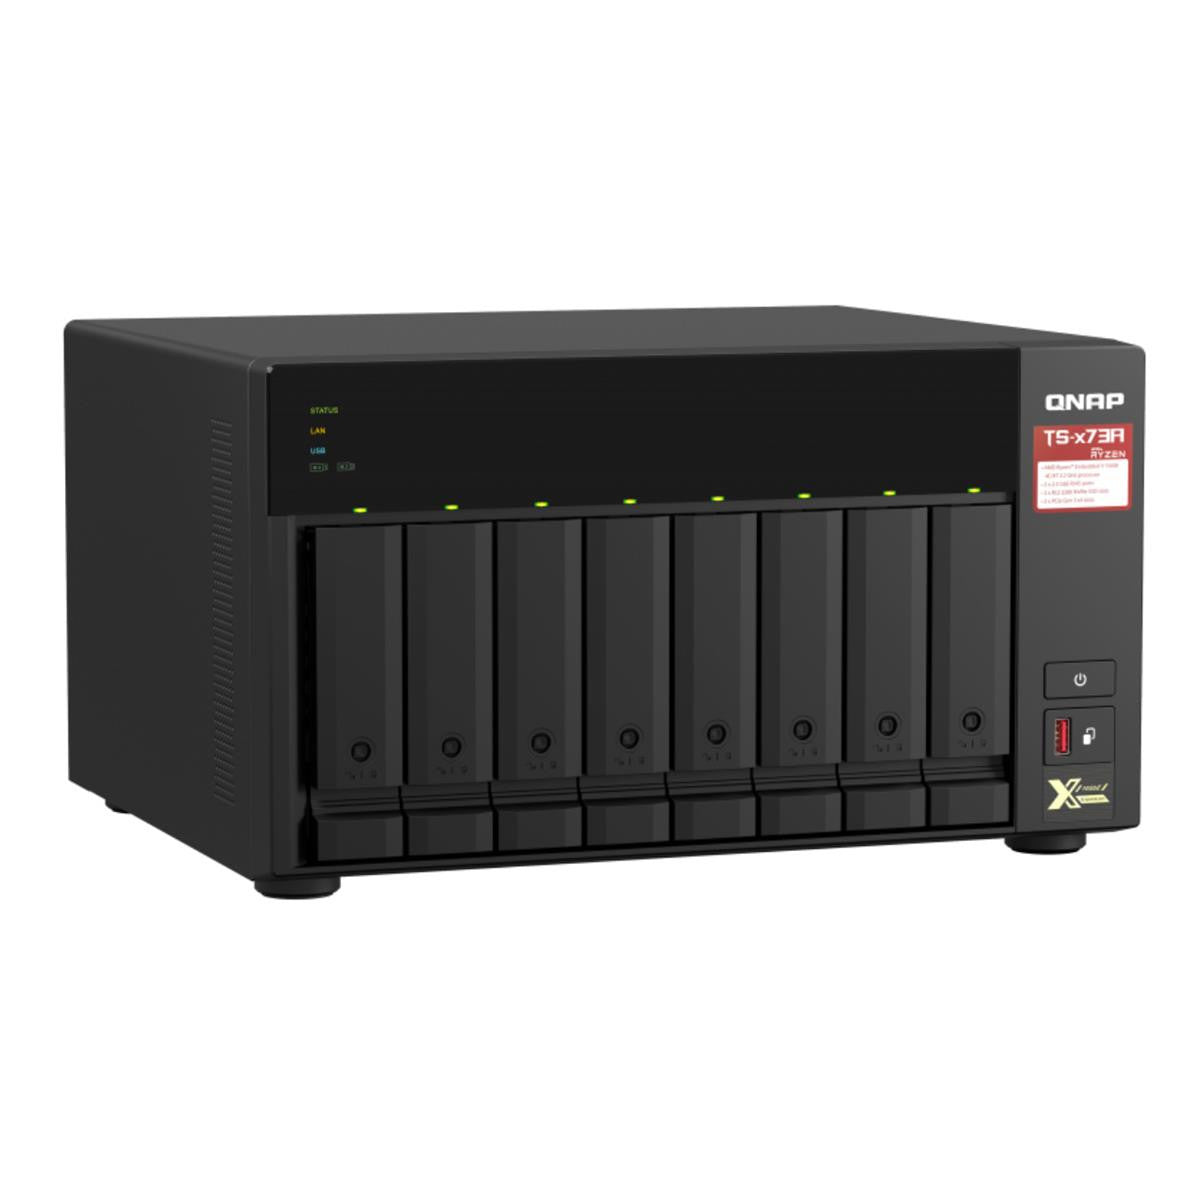 QNAP TS-873A 8-BAY NAS with 8GB DDR4 RAM and 32TB (8x4TB) Seagate Ironwolf NAS Drives Fully Assembled and Tested